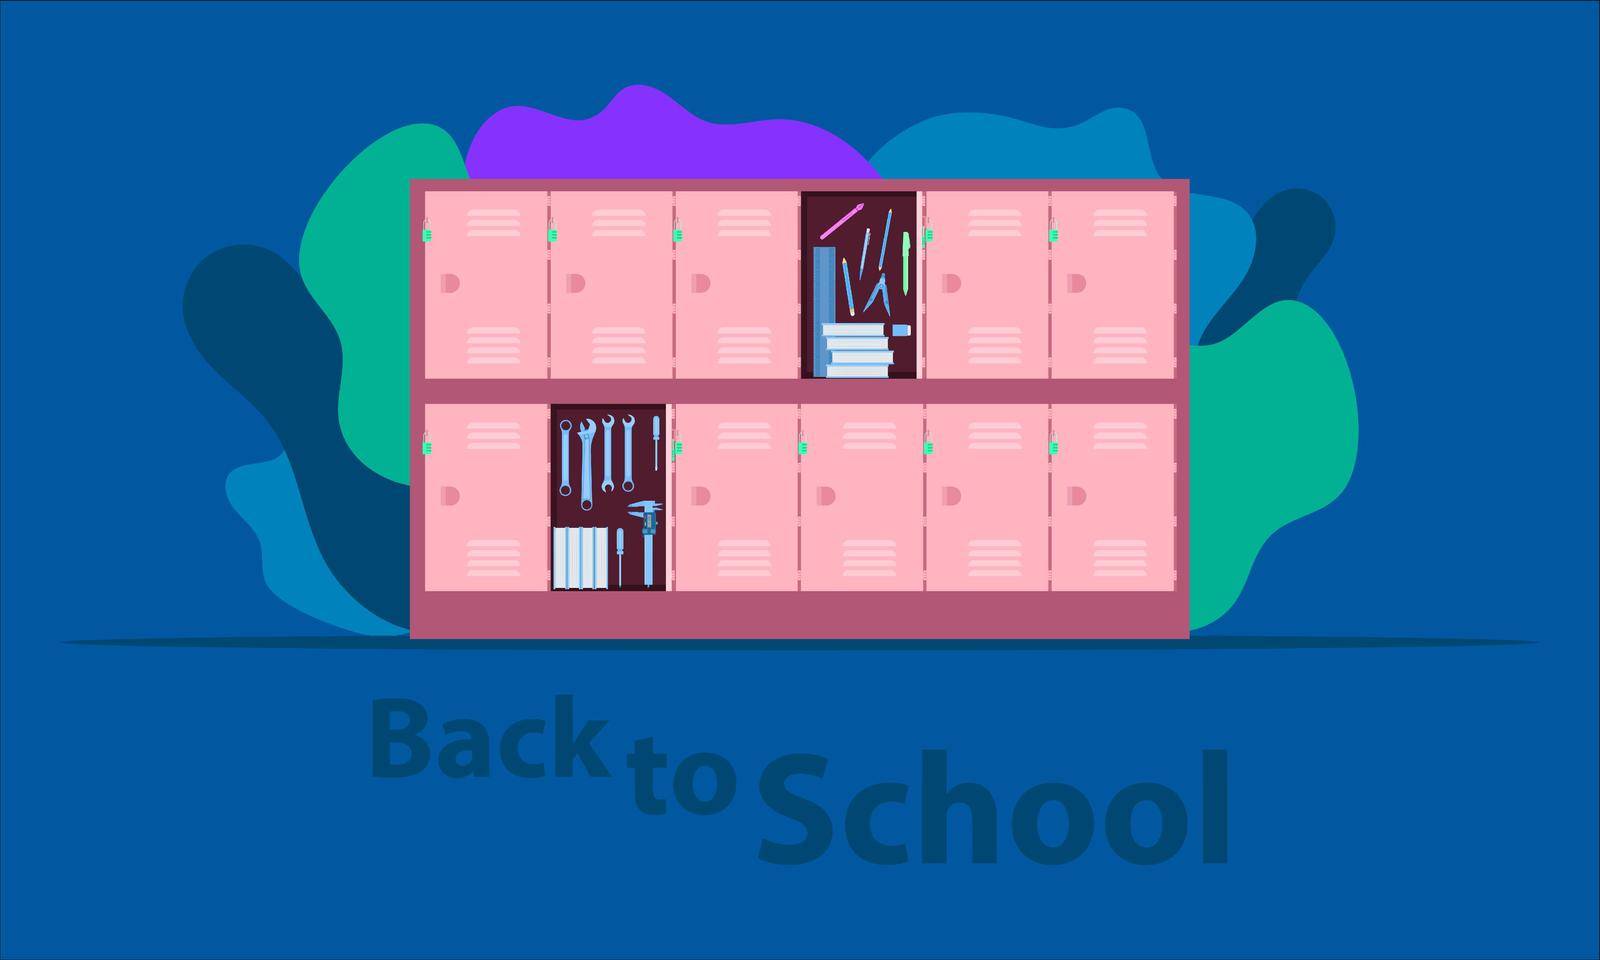 back to school. the hero locker. the helper your chilren's load.  time to funny happy with friends. vector illustration eps10